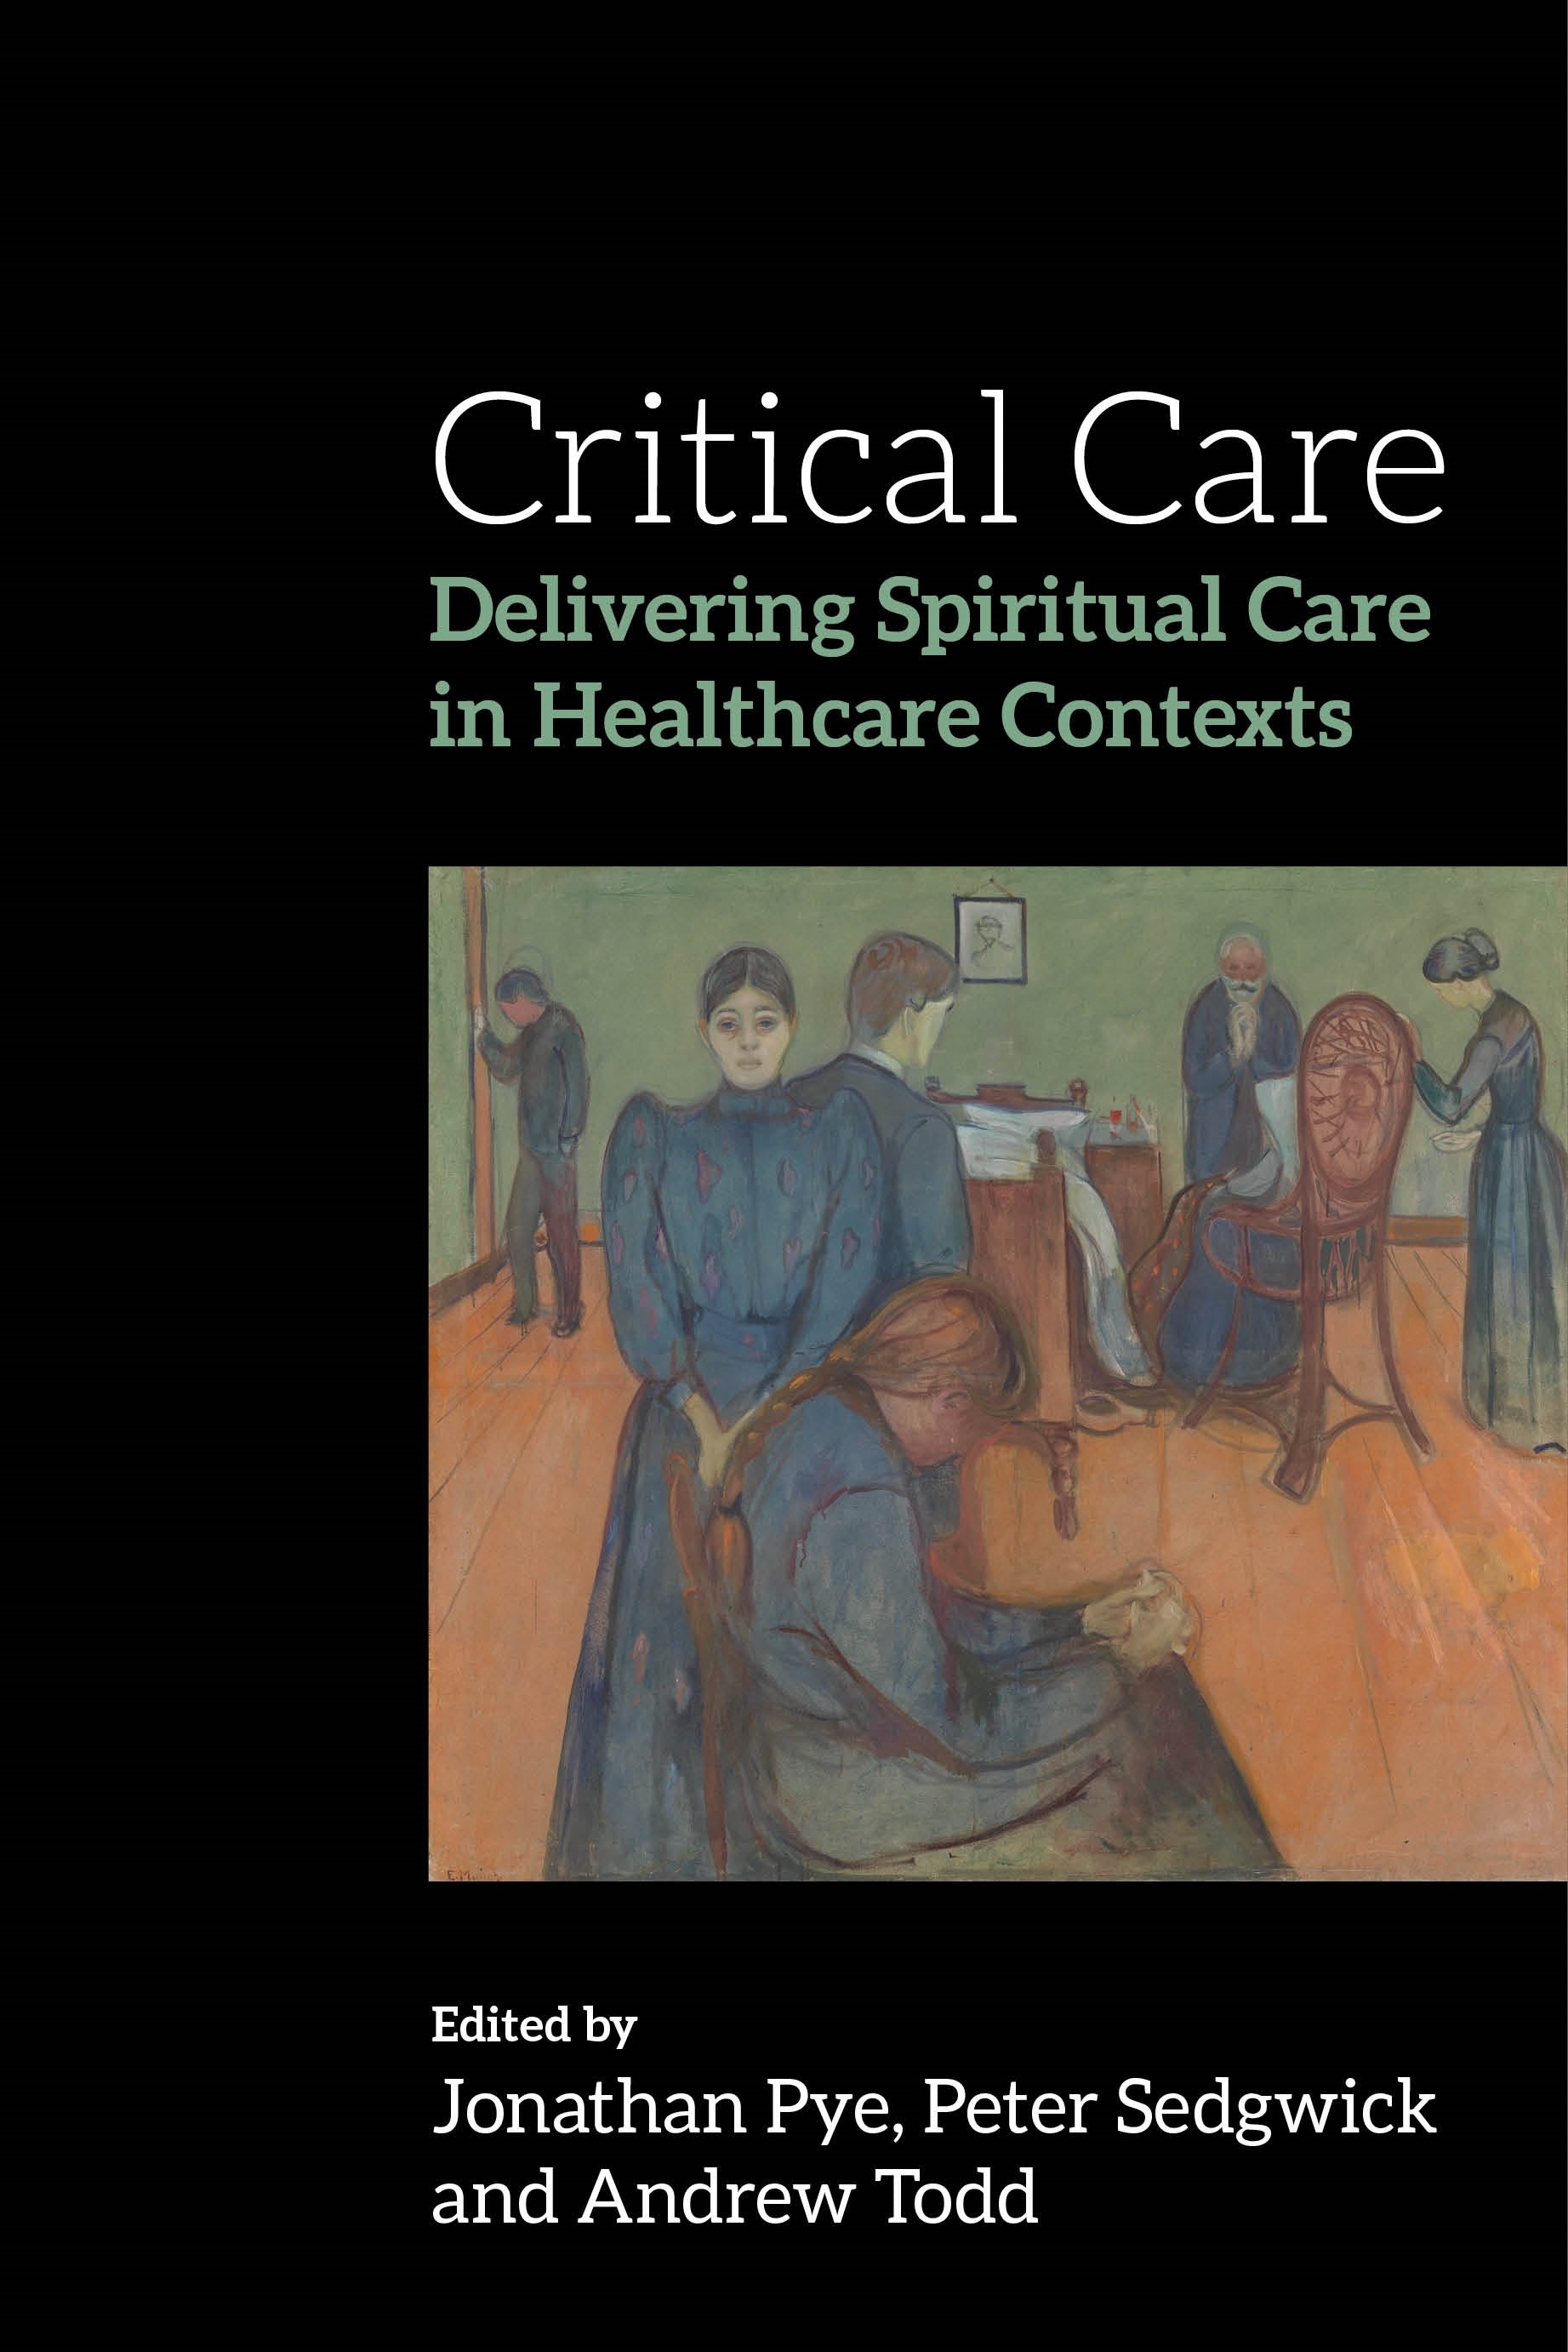 Critical Care by No Author Listed, Jonathan Pye, Peter Sedgwick, Andrew Todd